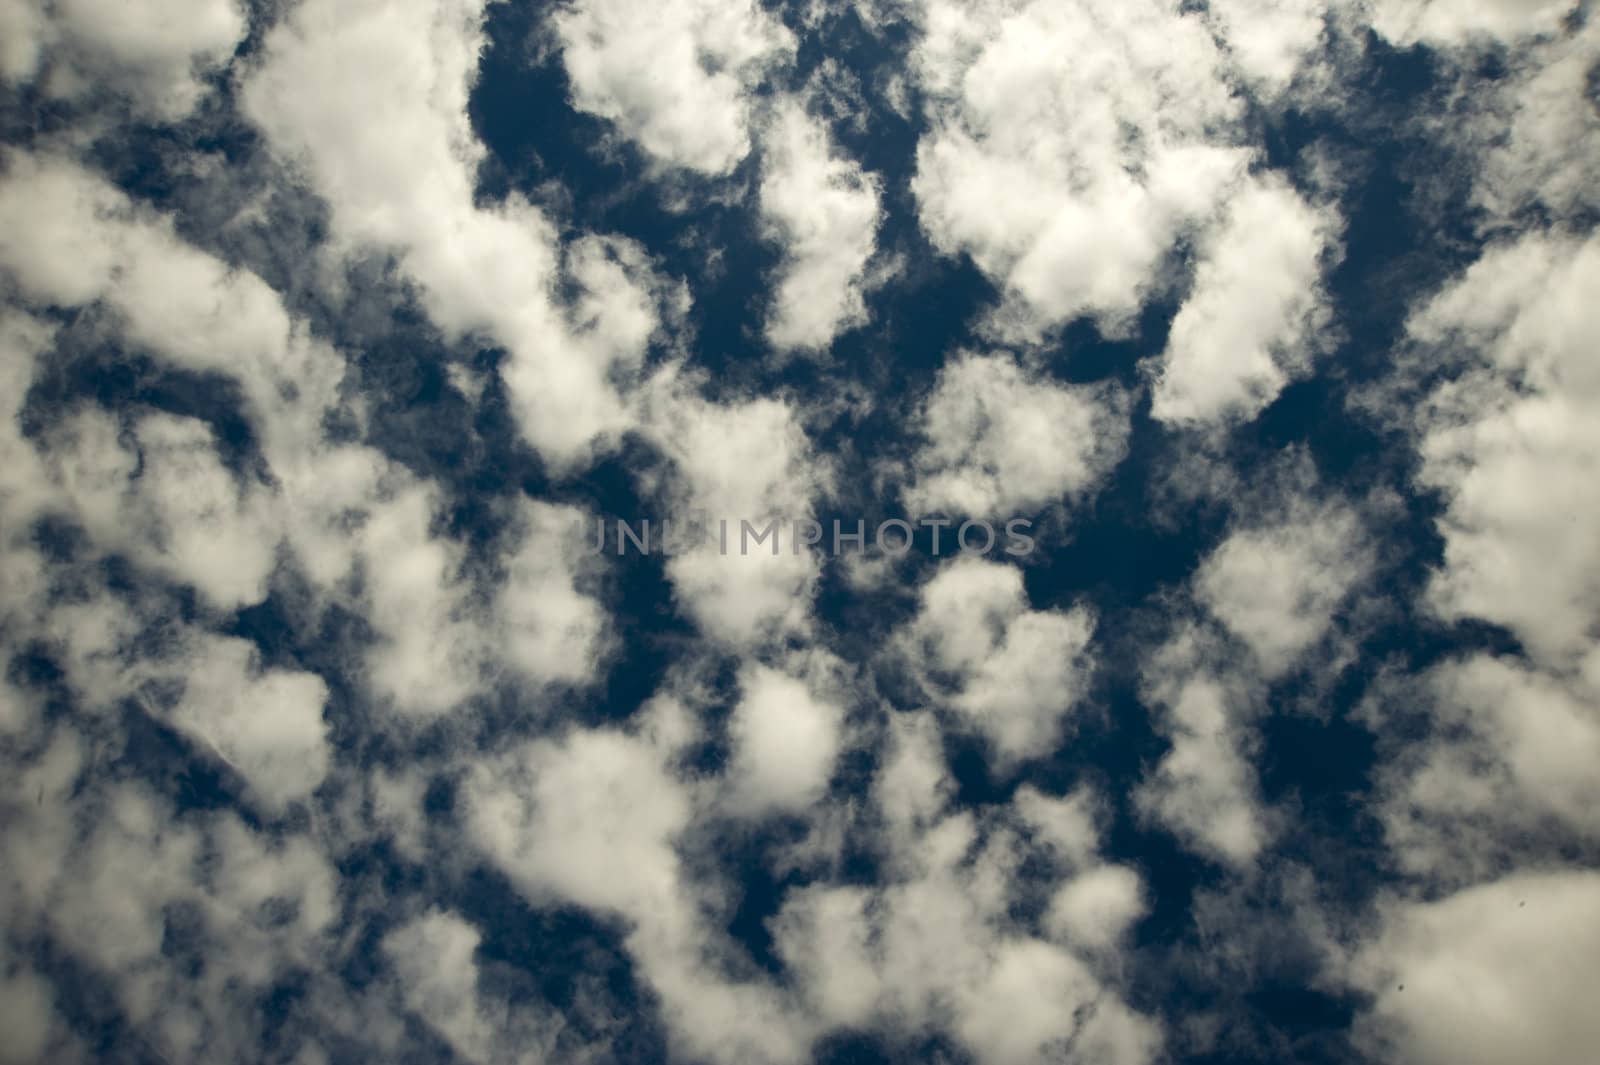 Clouds in the summer time. Taken sing the polarising filter.